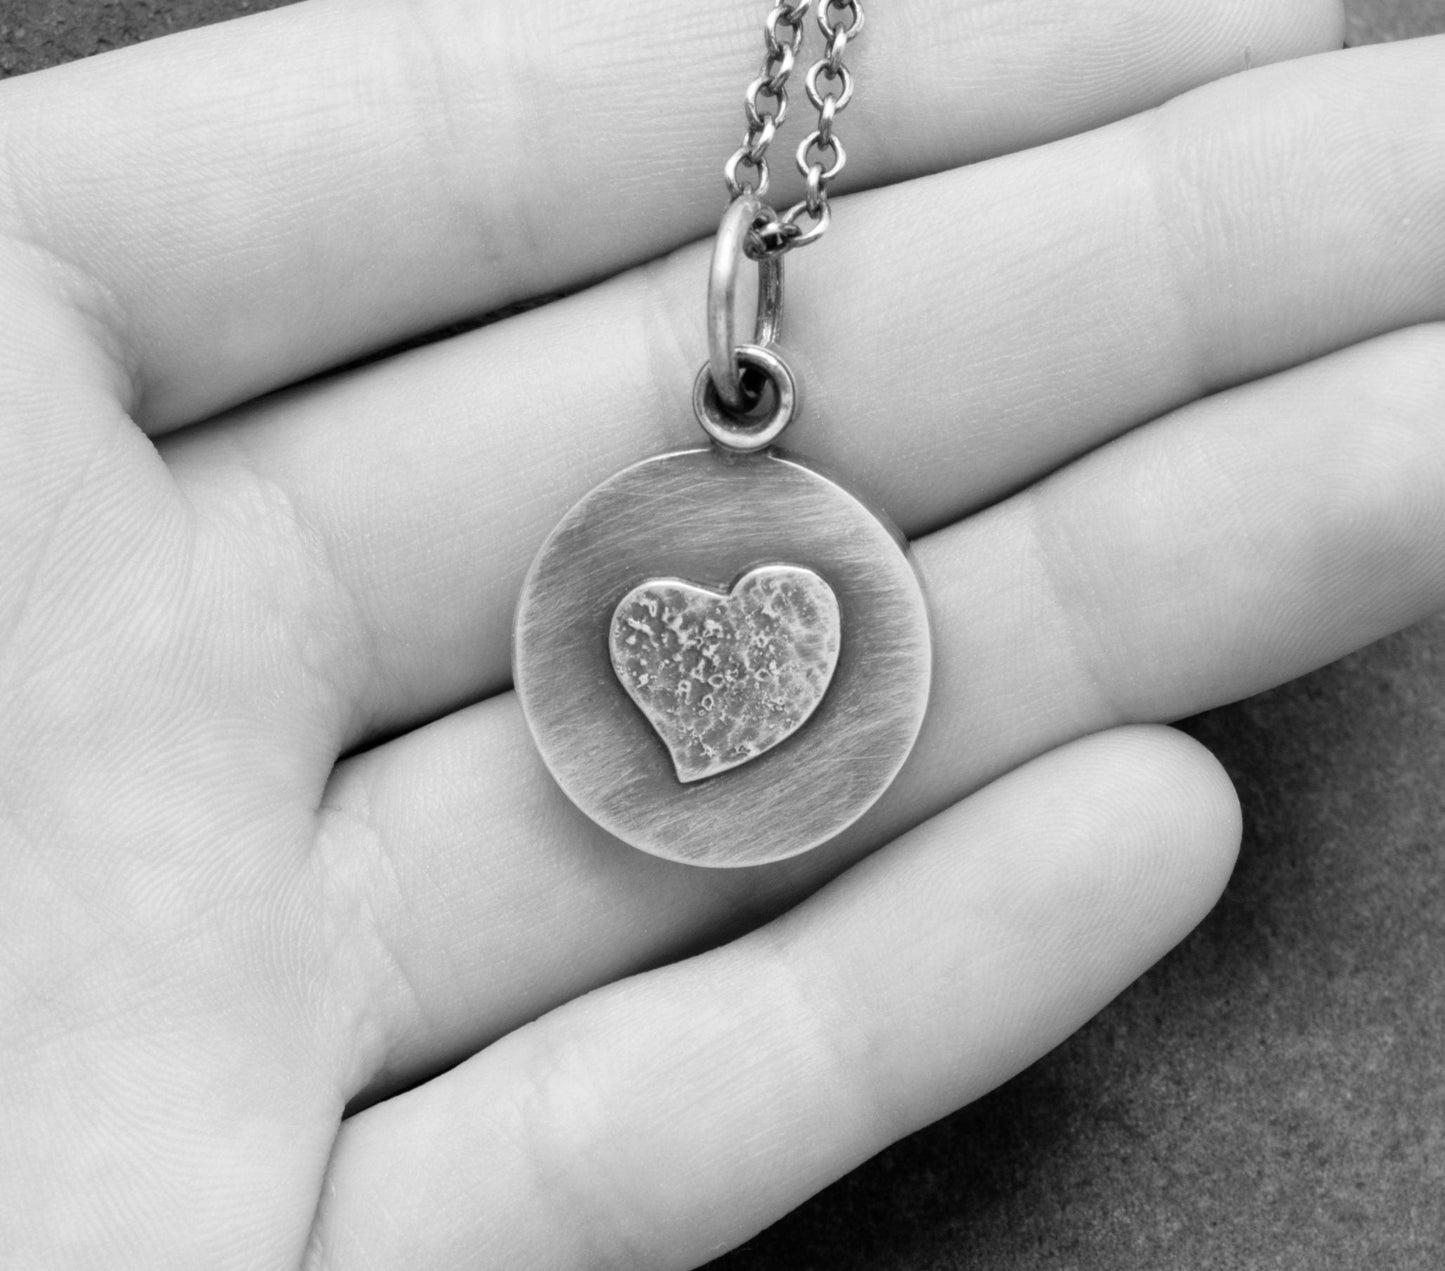 Rustic Heart Locket Sterling Silver Locket Necklace, Minimalist Photo Locket One Picture, Handmade Gift For Her, Love Locket Silver Jewelry